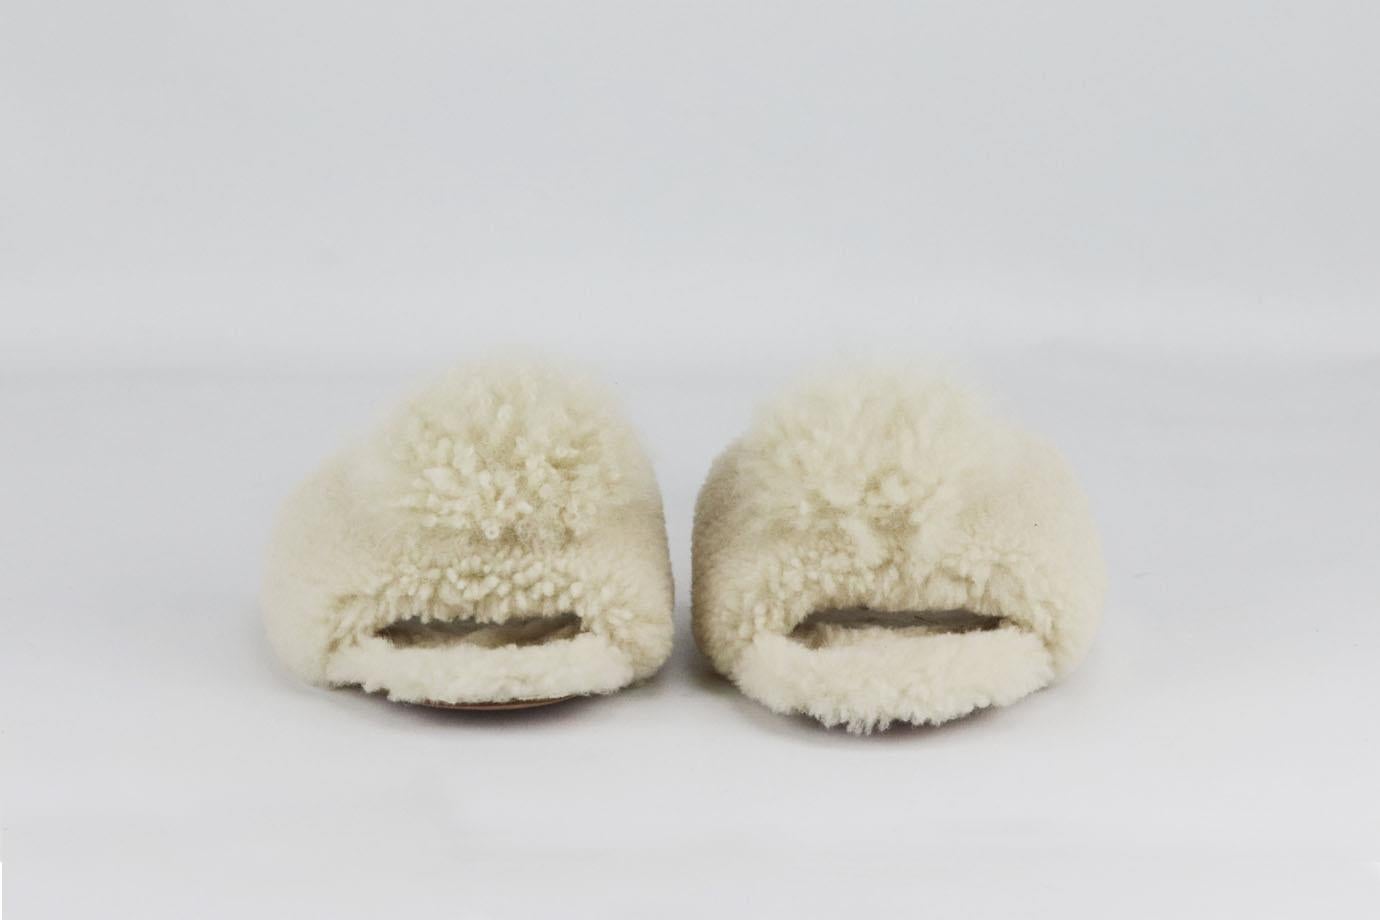 Aquazzura pom pom embellished shearling slides. Cream. Slip on. Does not come with dustbag or box. Size: EU 38 (UK 5, US 8). Insole: 9.6 in. Heel: 0.7 in Very good condition - Light wear to soles; see pictures.
